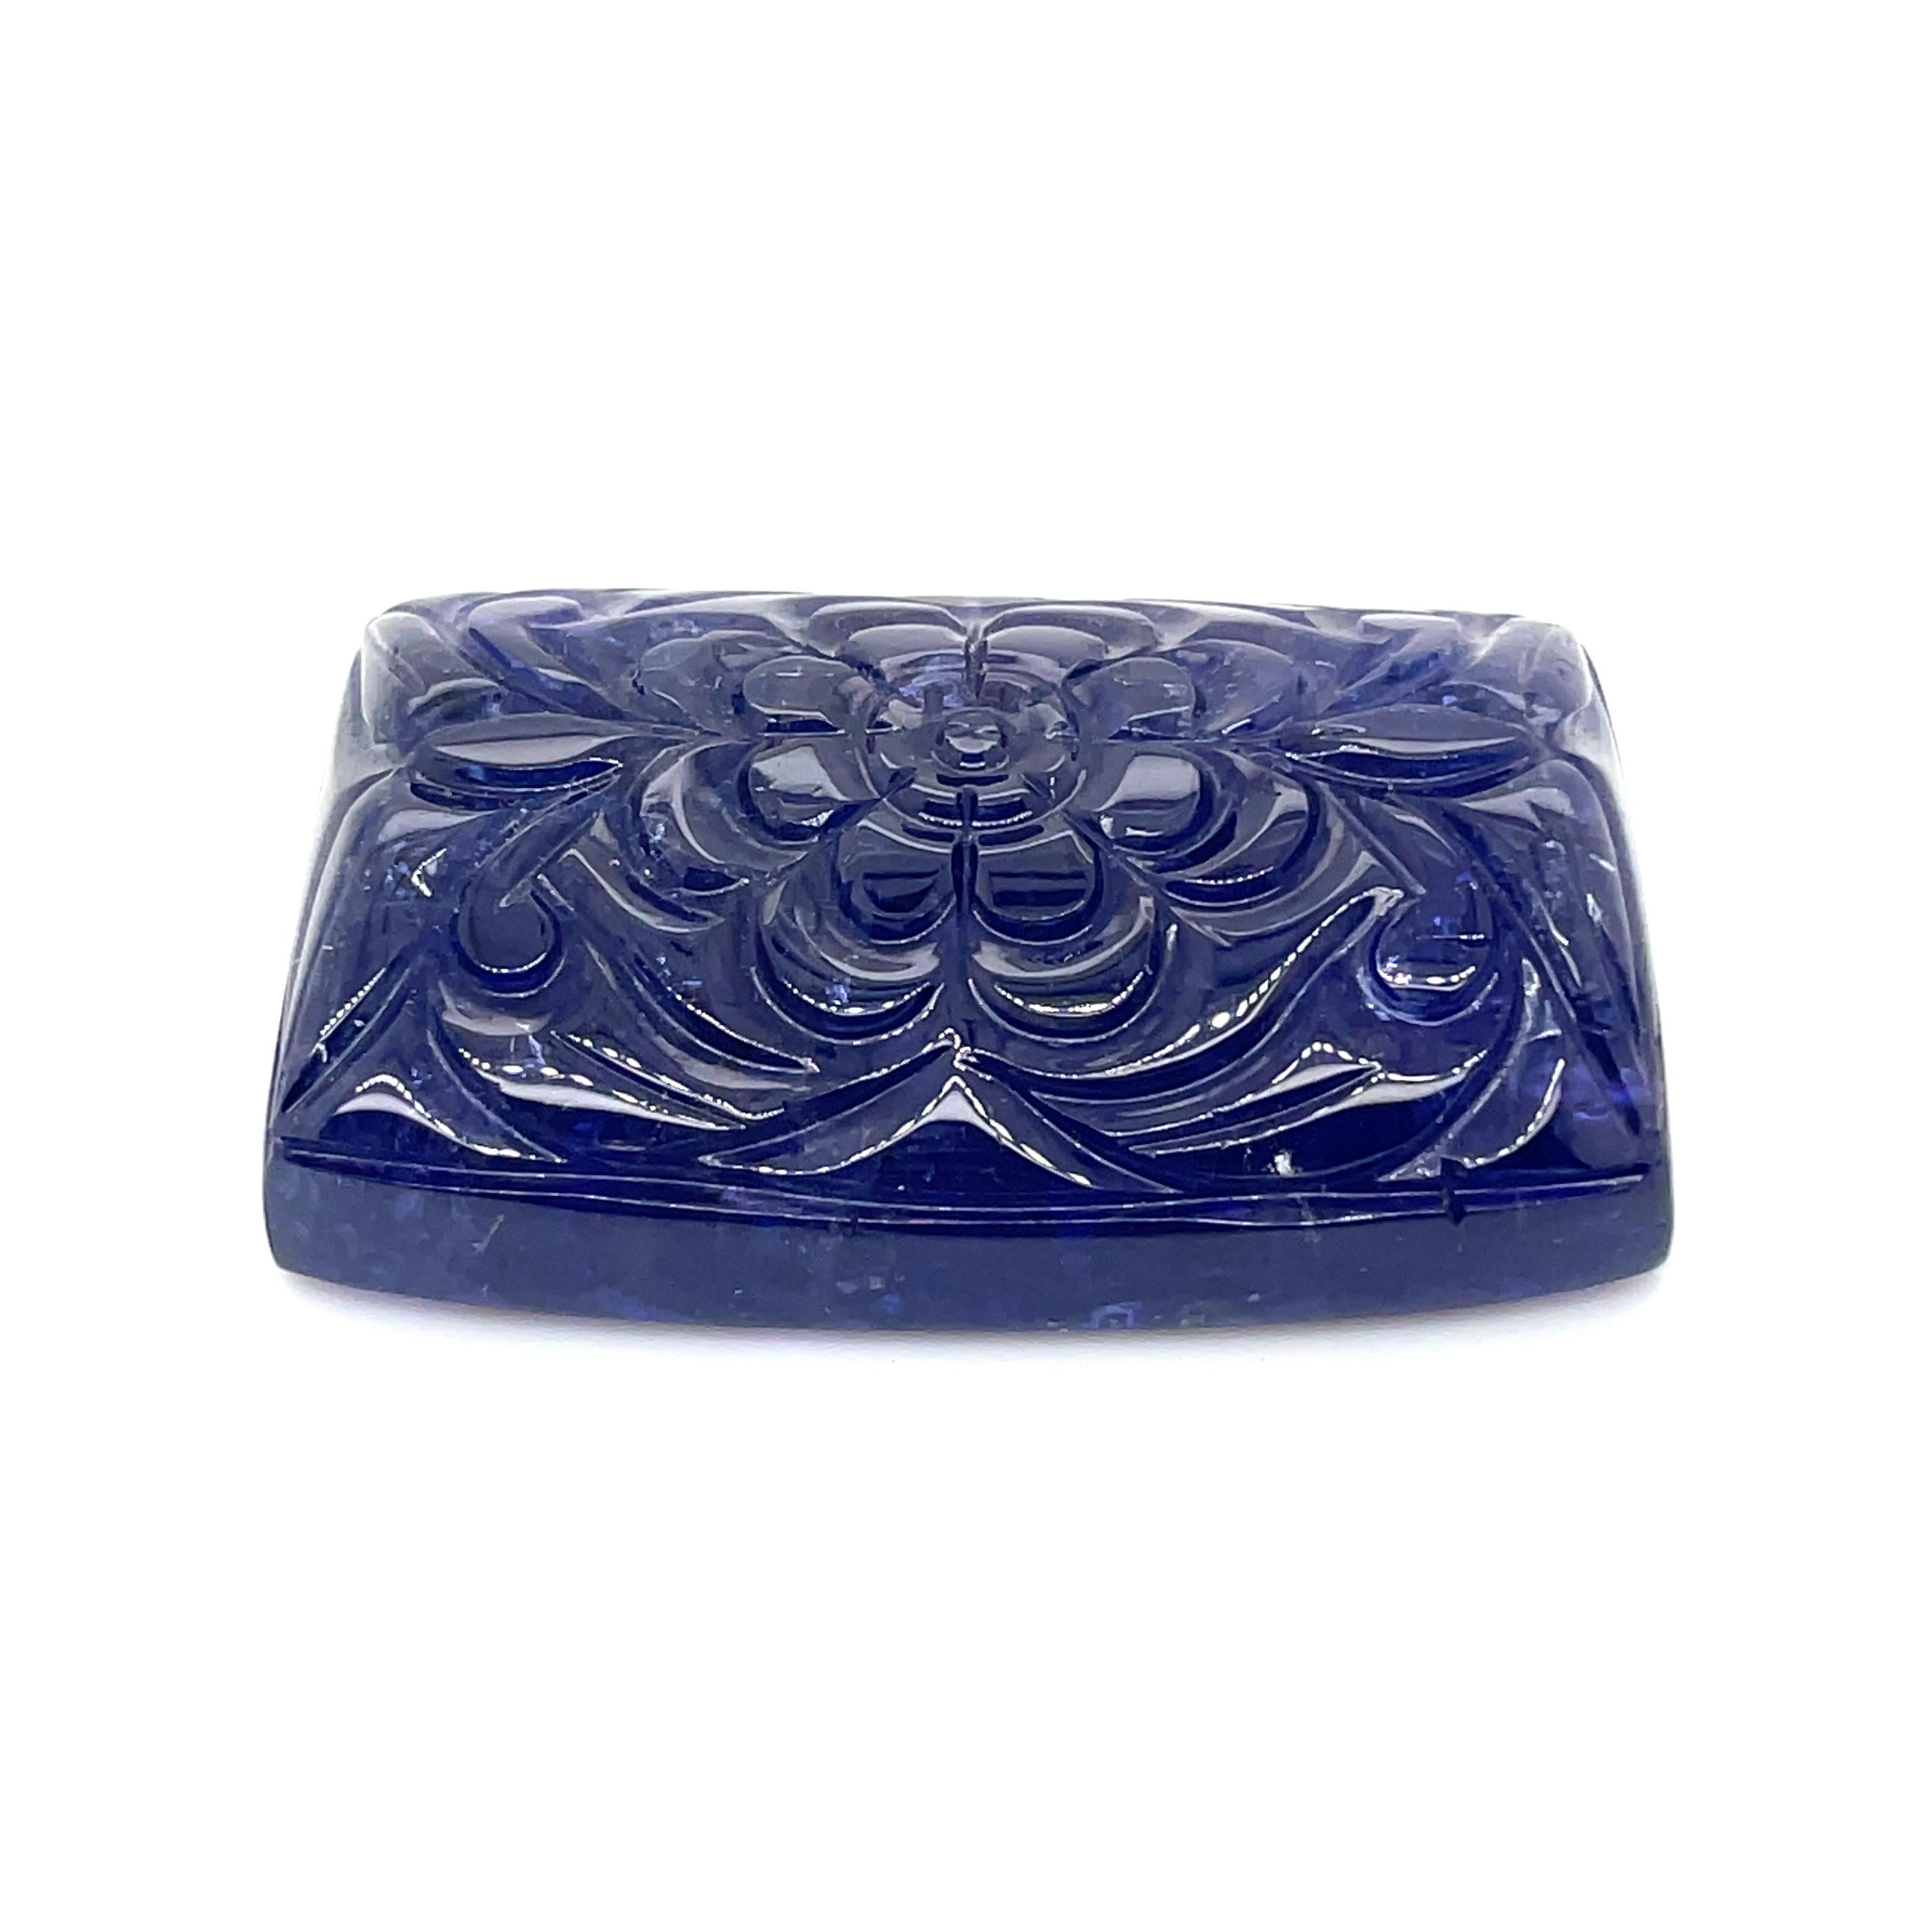 Carved Flower Rectangular Tanzanite Cts 176.08 For Sale